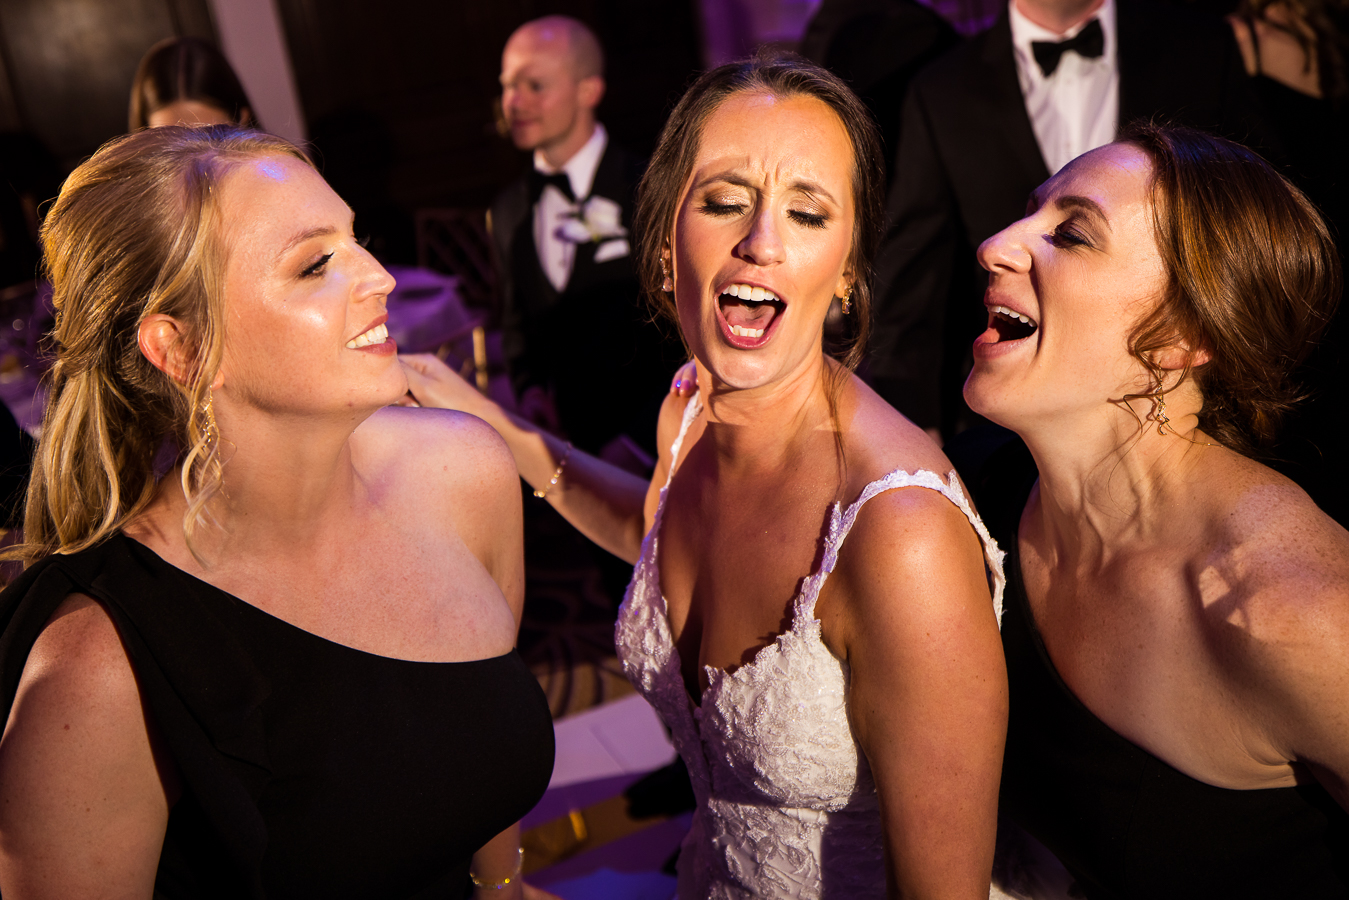 nj wedding photographer, lisa rhinehart, captures this fun candid moment from the wedding reception of the bride singing with her bridesmaids at the palace in somerset nj 